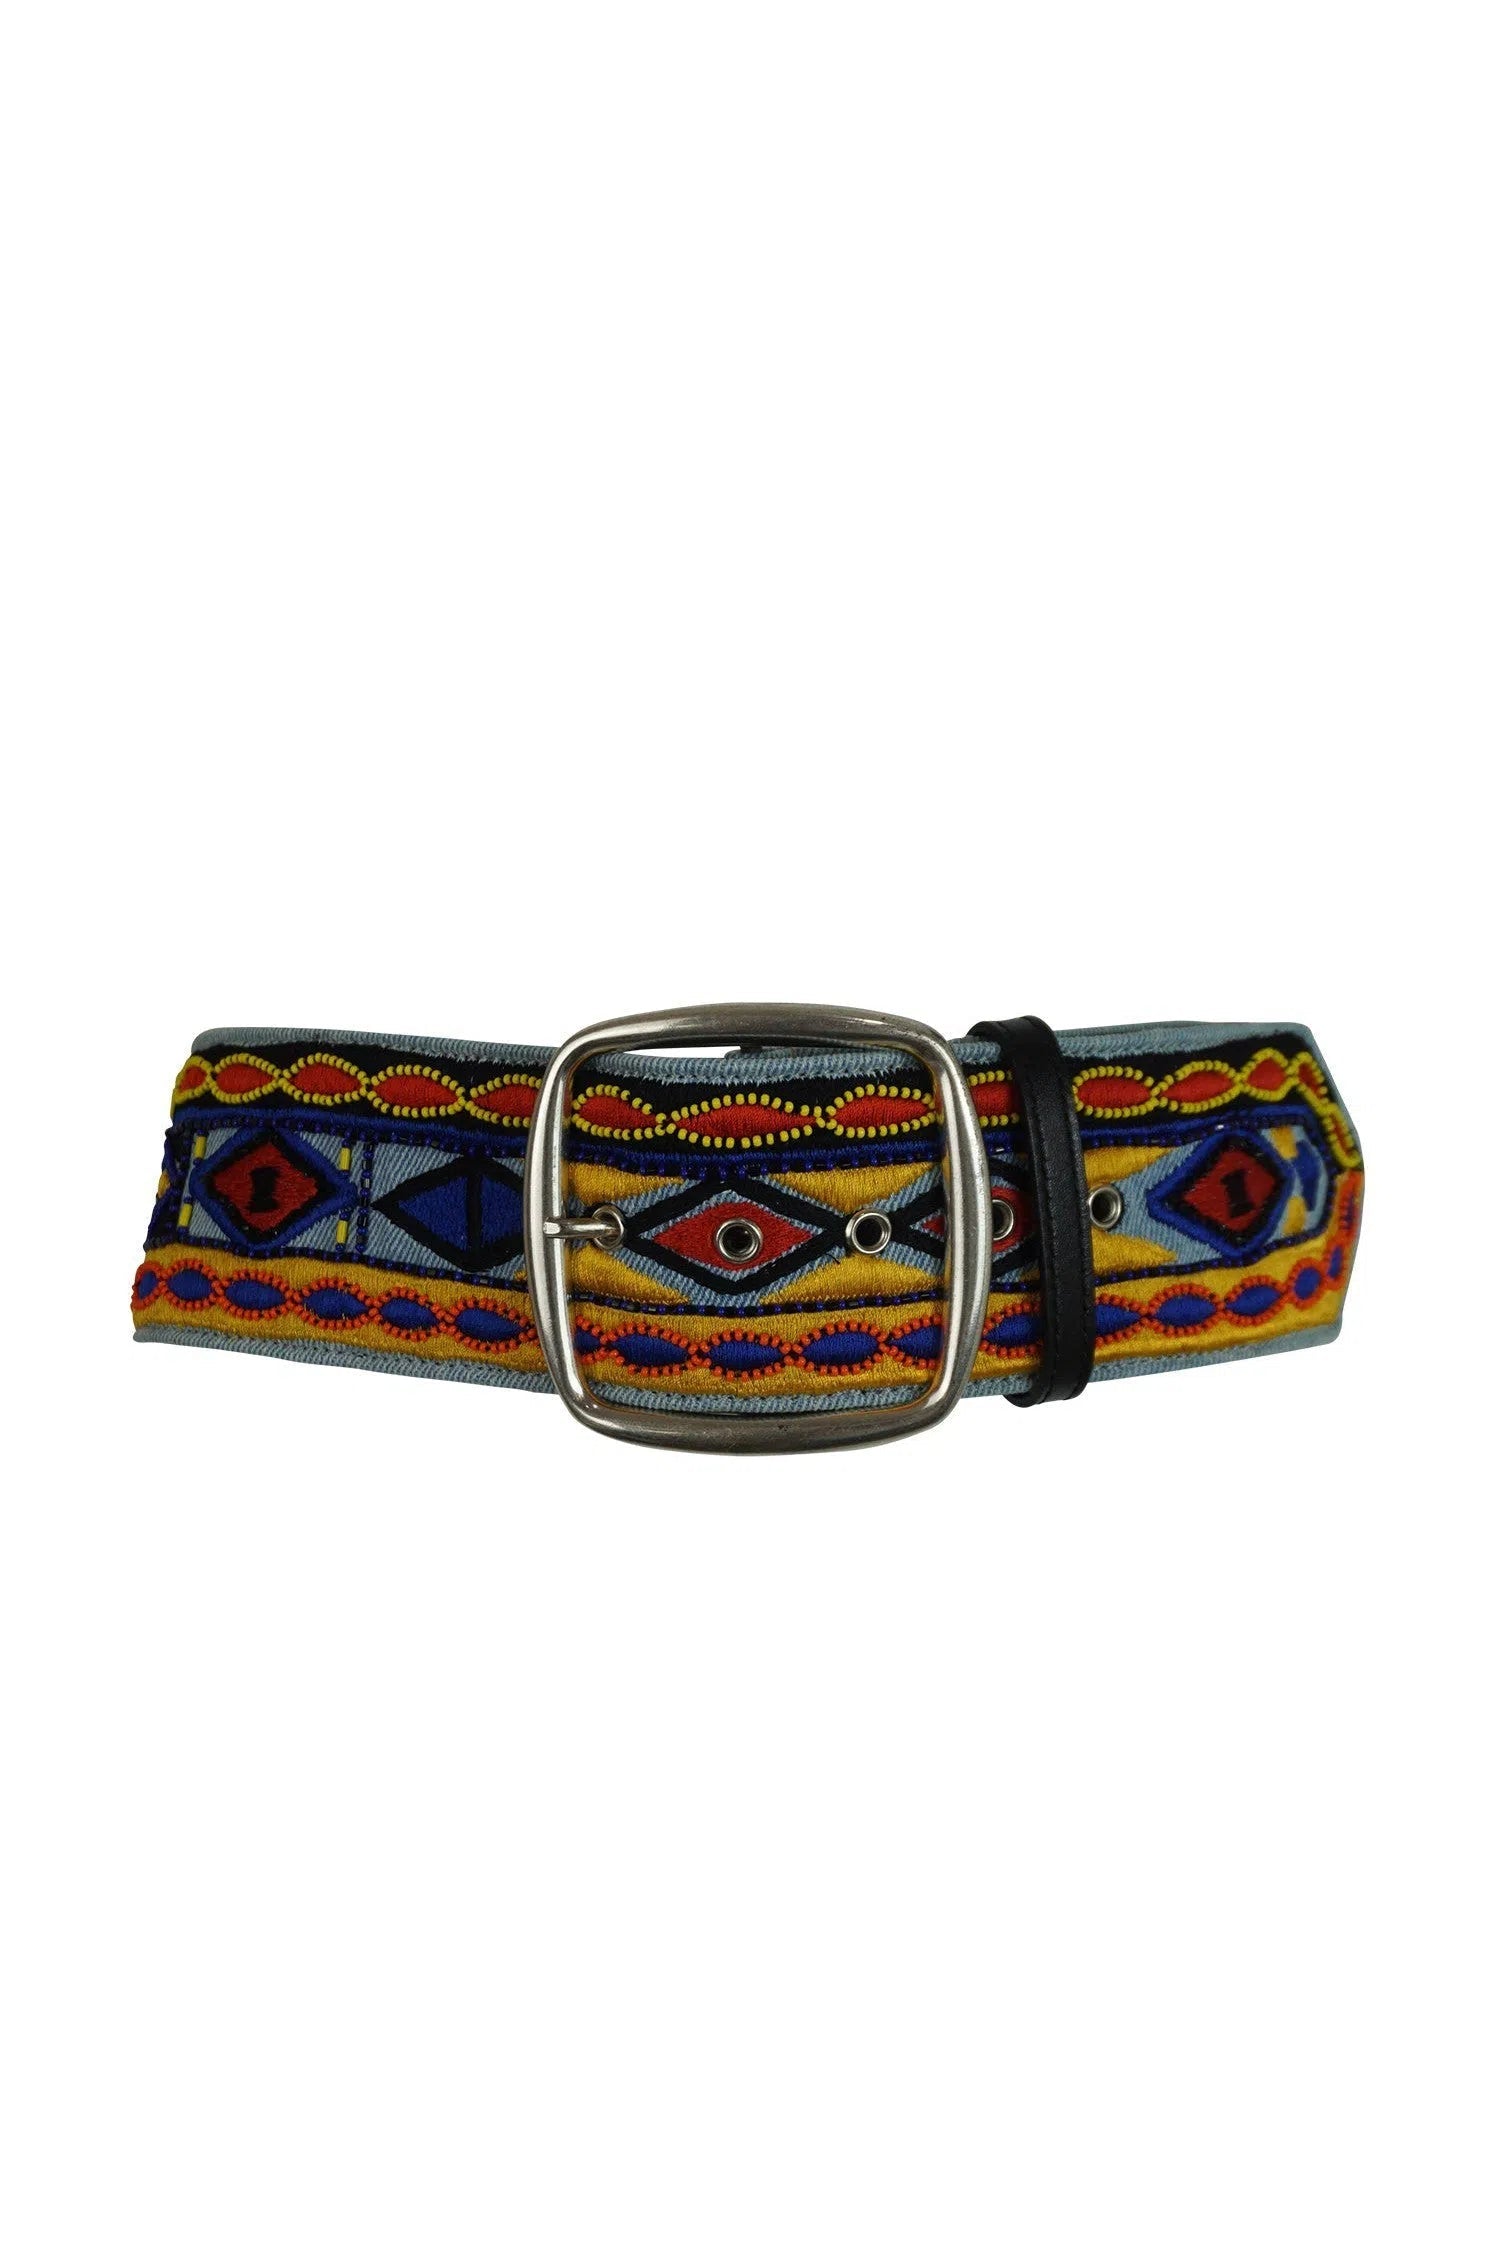 Etro Denim Beaded Wide Belt with Silver Buckle - Foxy Couture Carmel